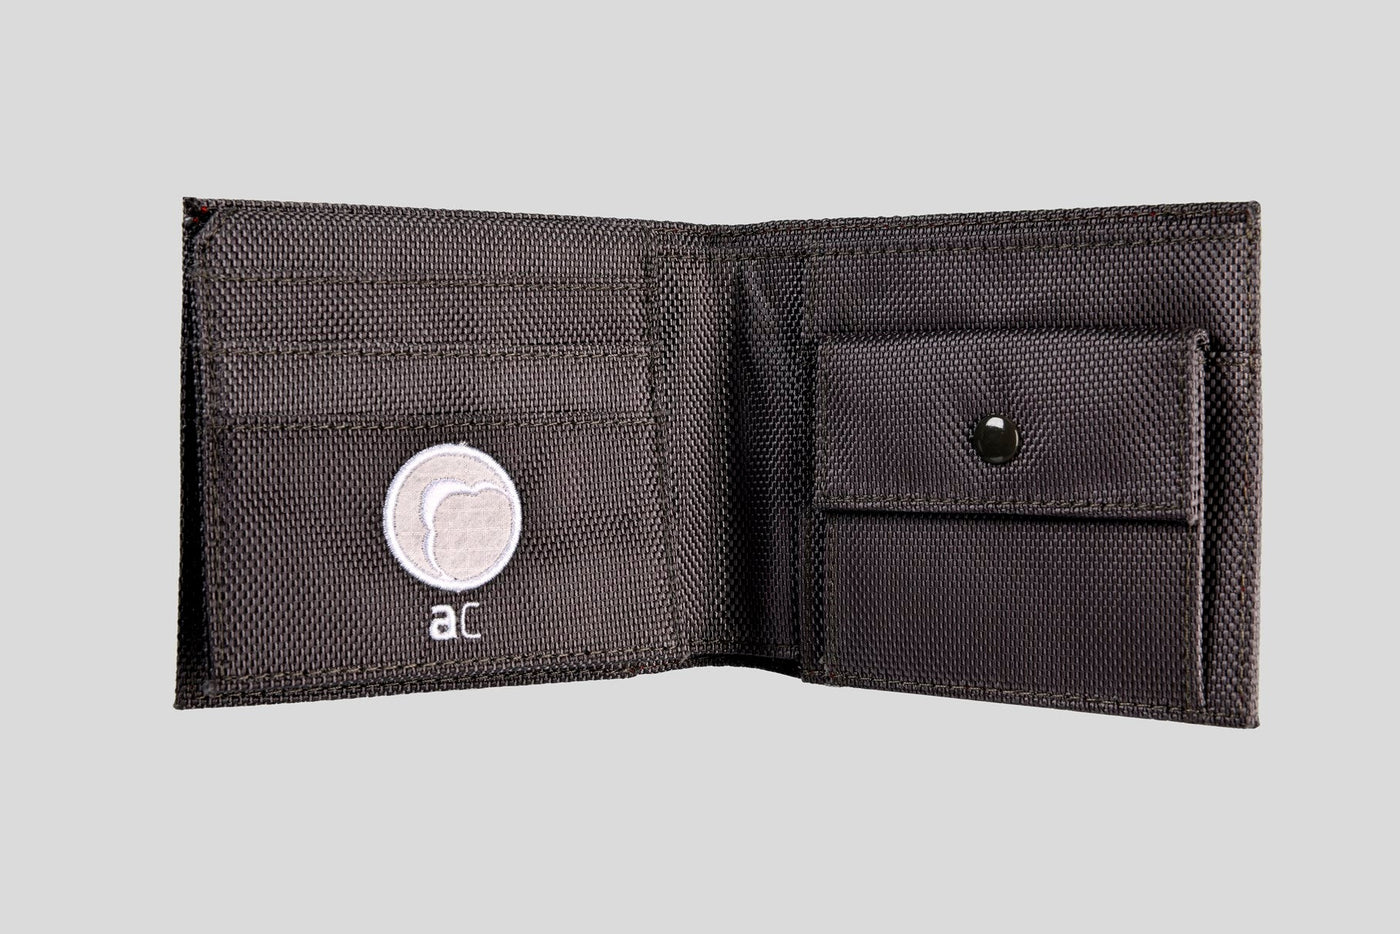 Wallet from our "Artifactcloud" accessories collection. With flown swatch of beta cloth as part of the sticked 'AC' logo.